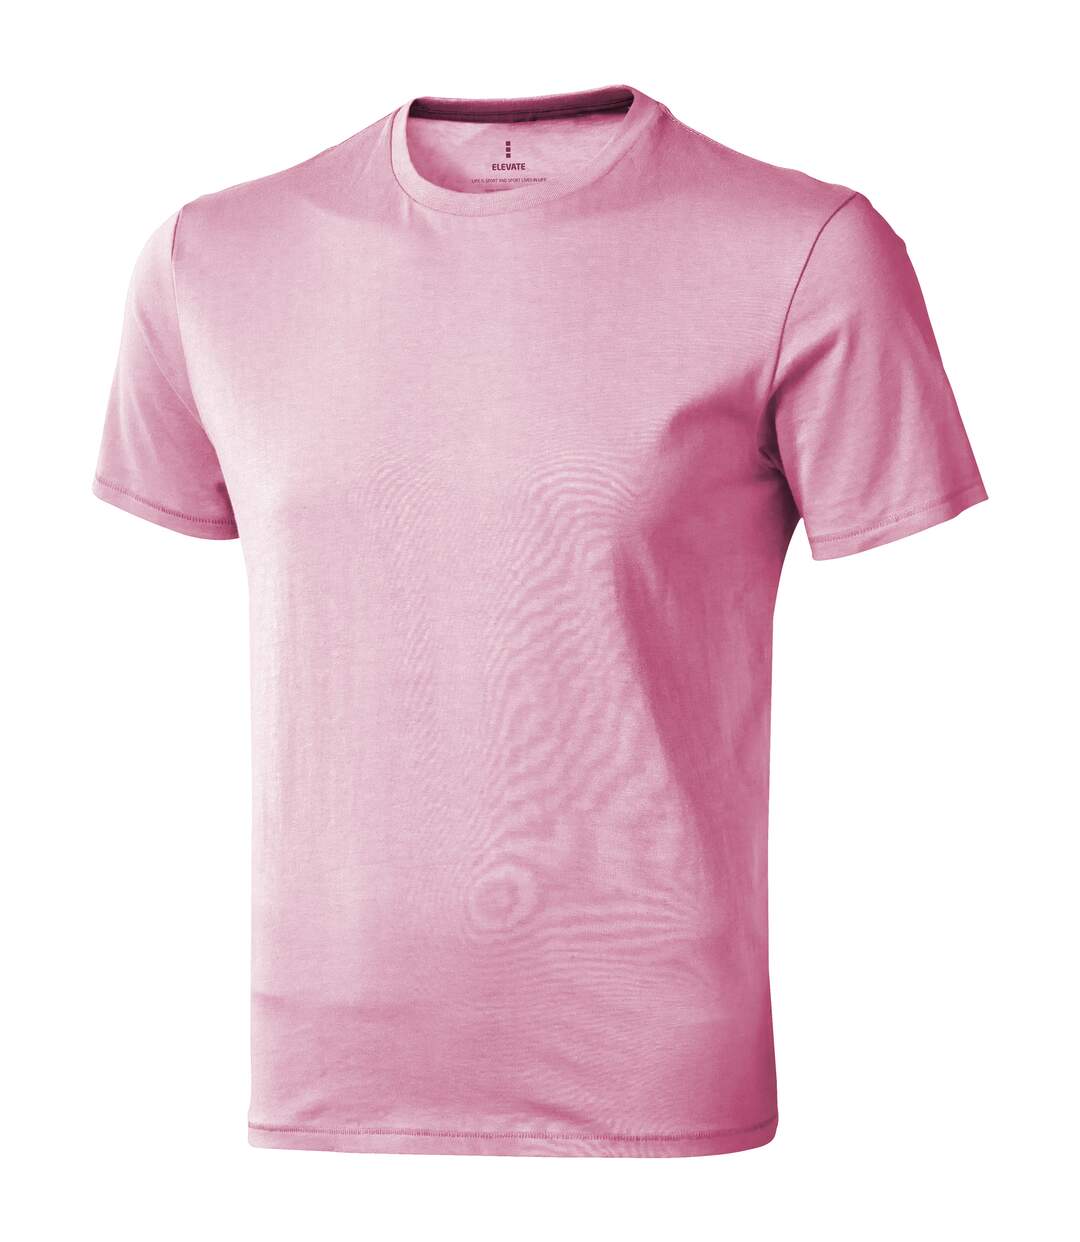 Elevate - T-shirt manches courtes Nanaimo - Homme (Rose clair) - UTPF1807